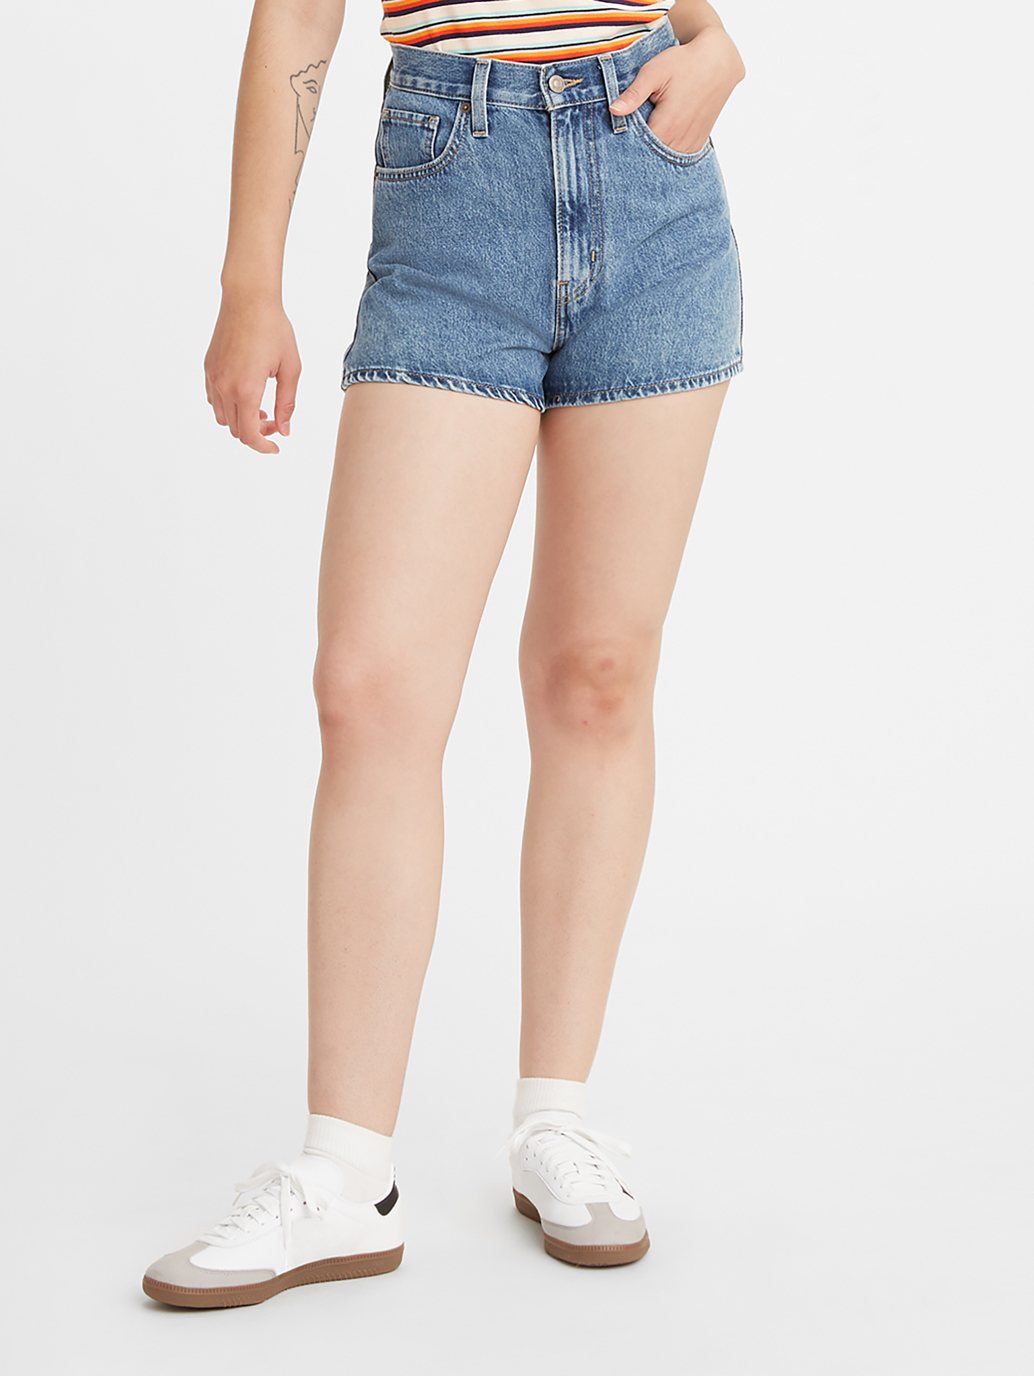 Buy Levi's® Women's High-Waisted Mom Shorts | Levi's® Official Online Store  SG